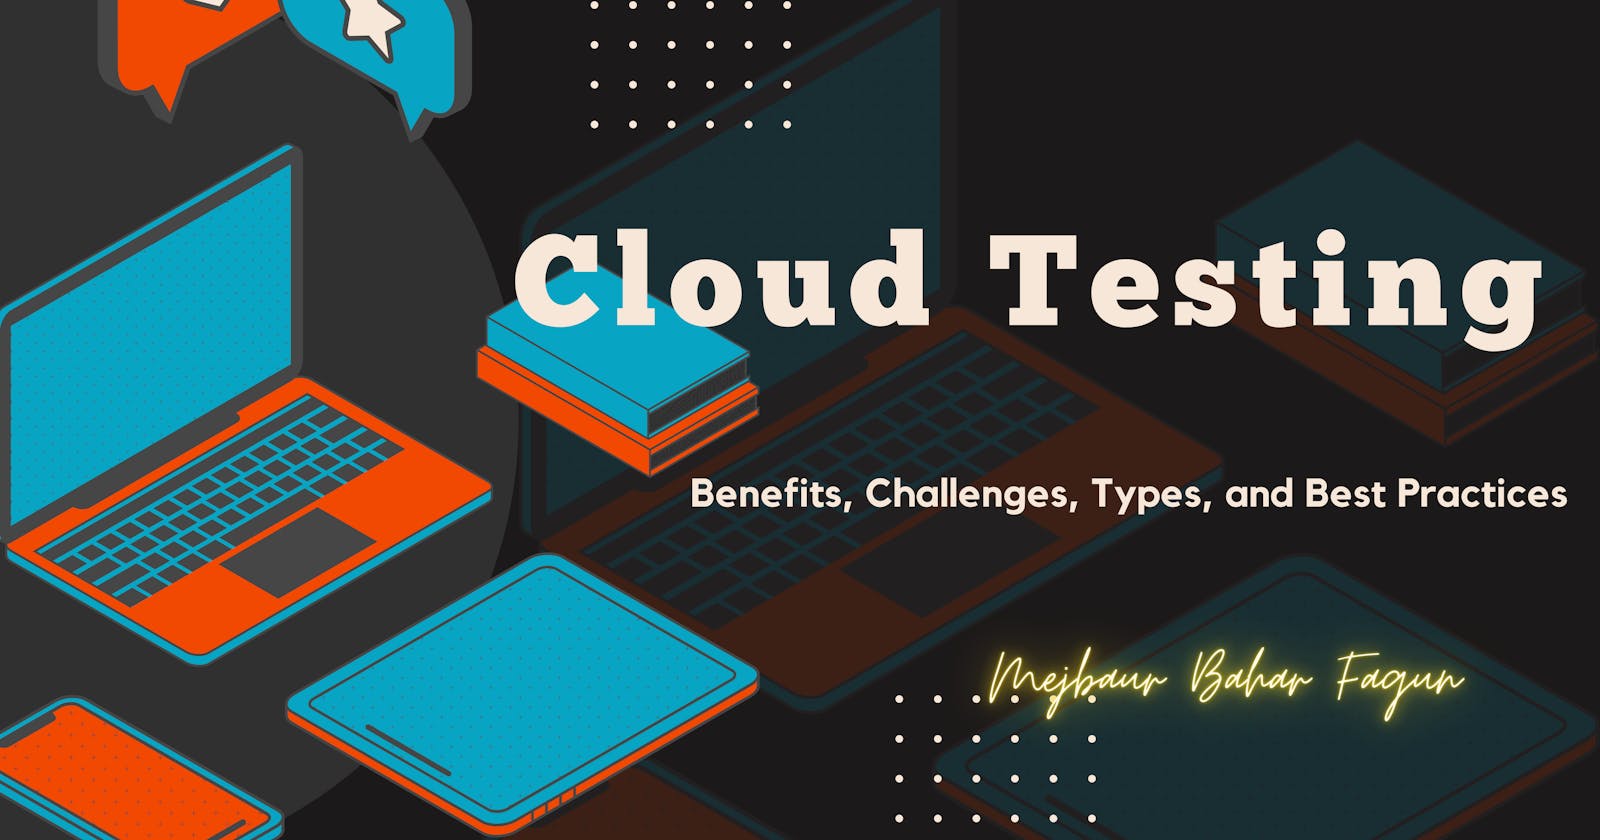 Cloud Testing: Benefits, Challenges, Types, and Best Practices